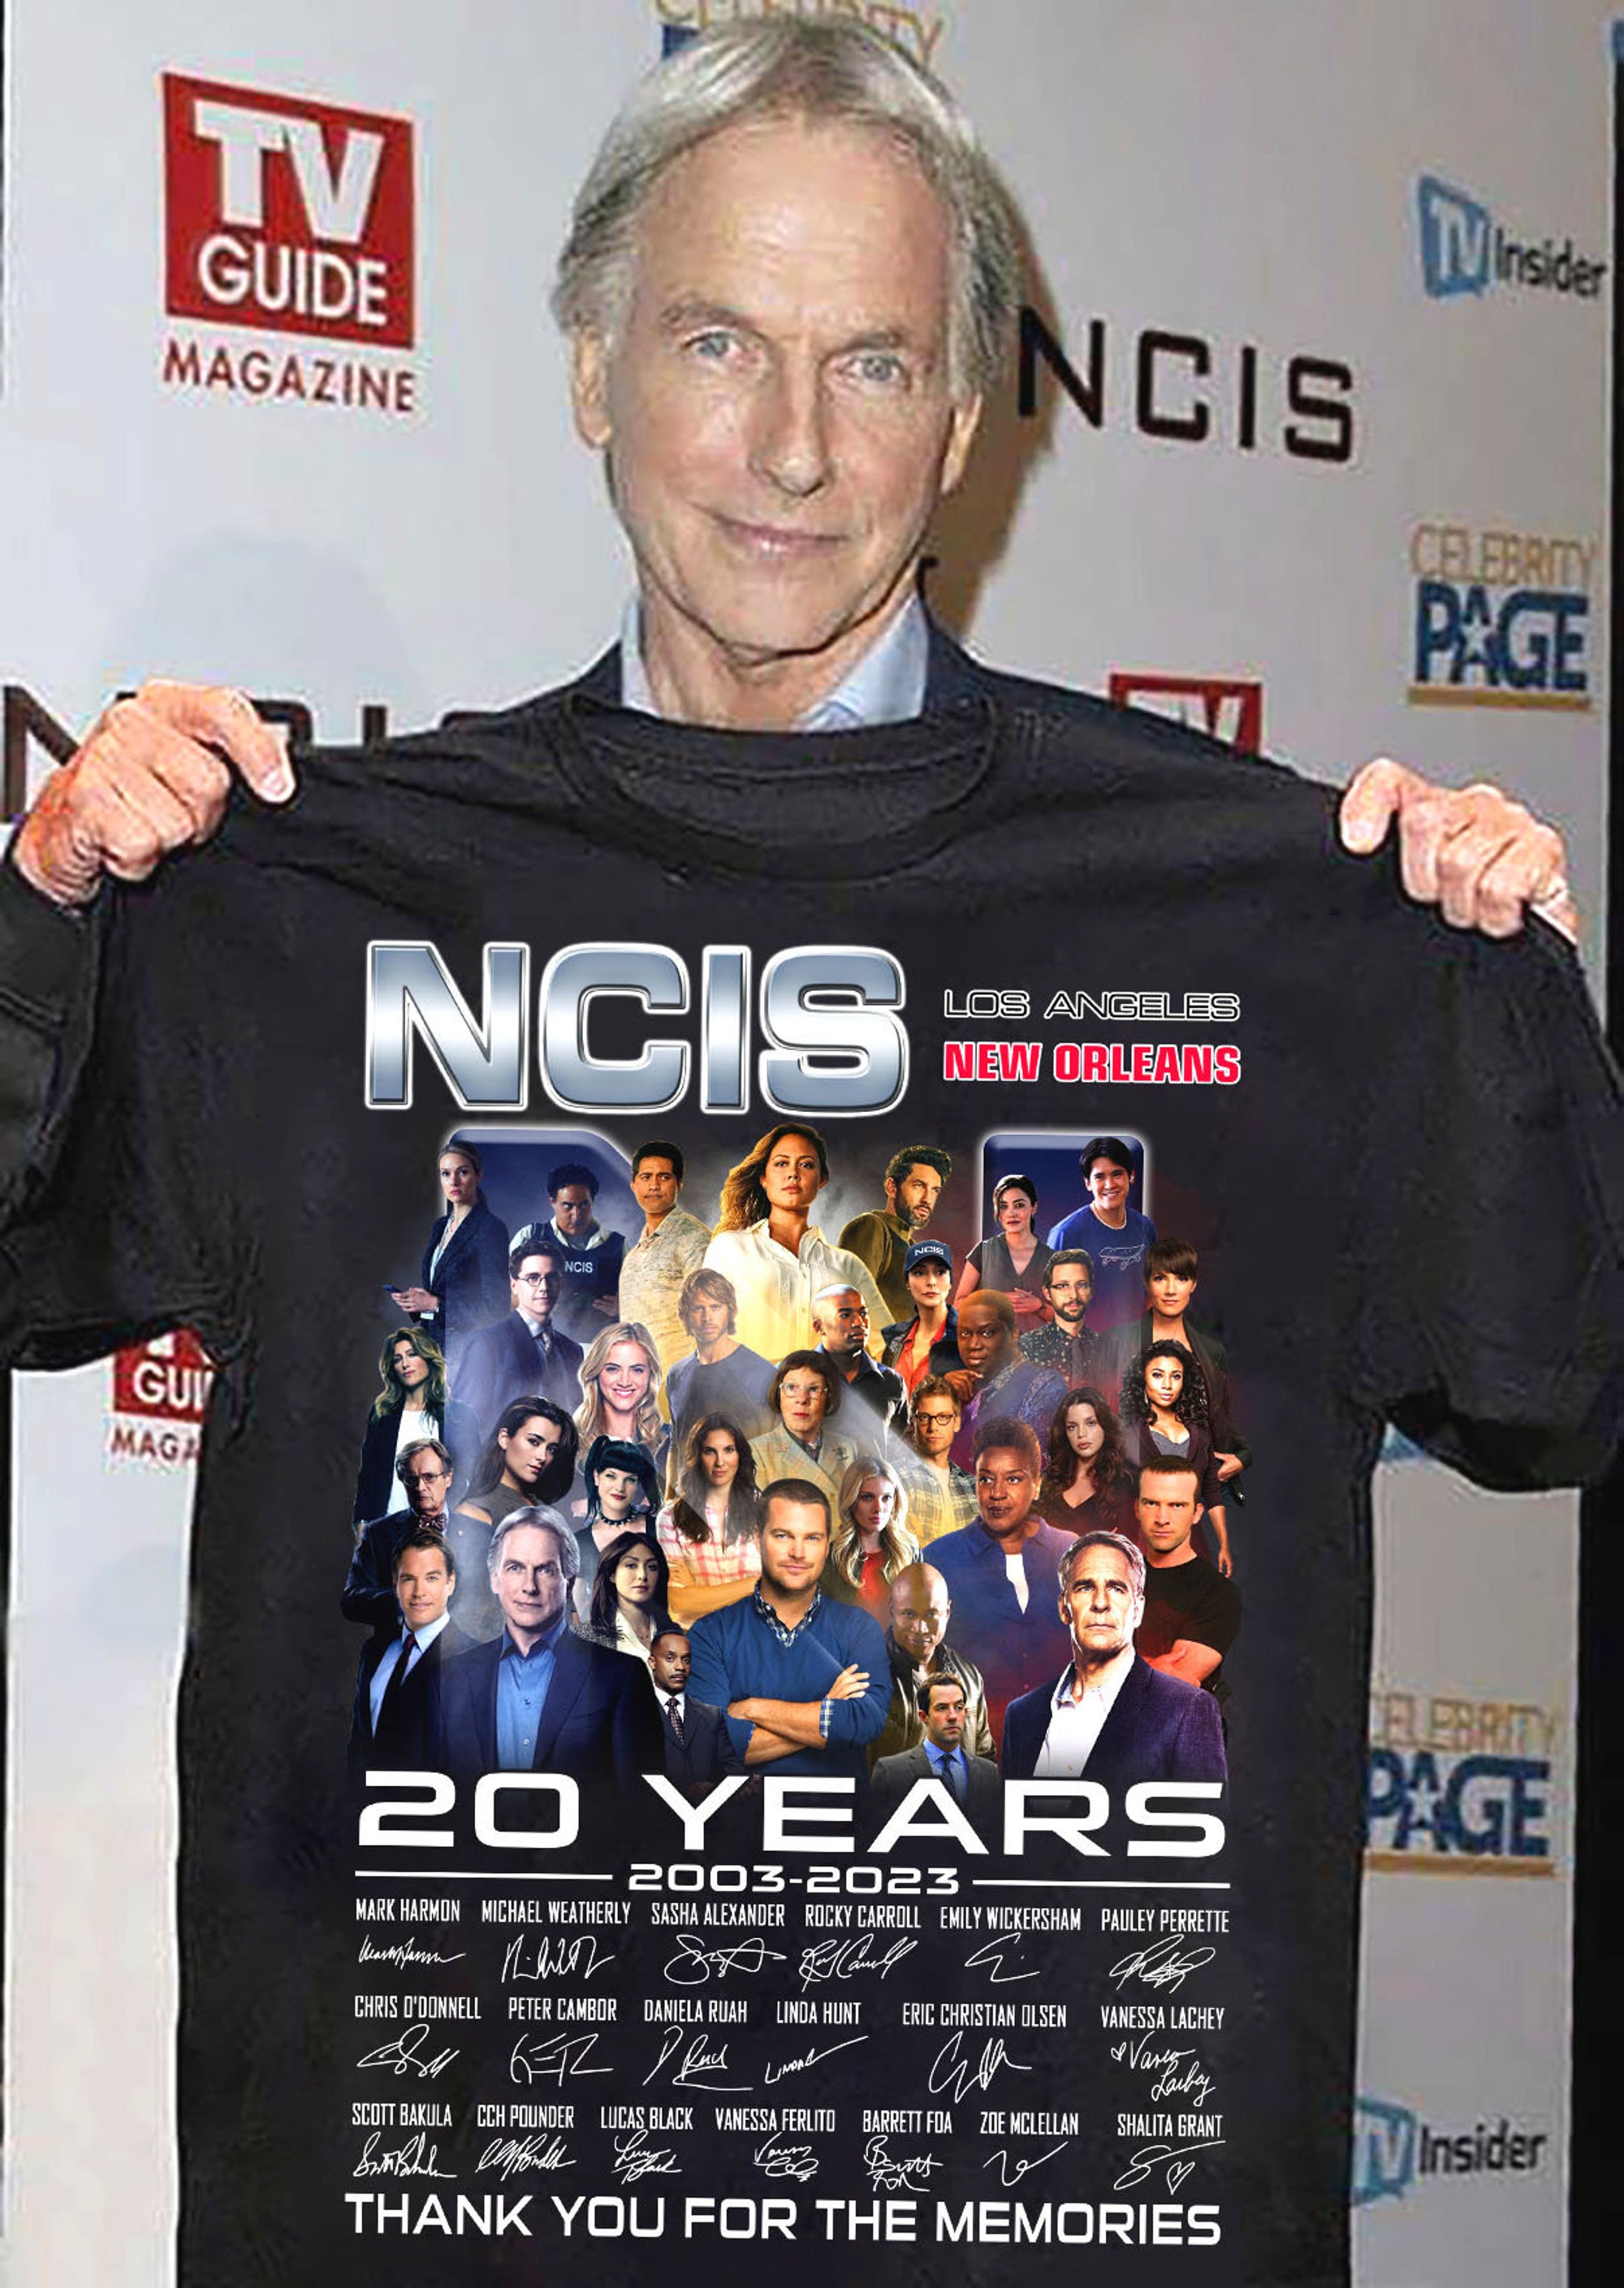 Ncis Los Angeles New Orleans 20 Years 2003 2023, Ncis 20 Years T-Shirt